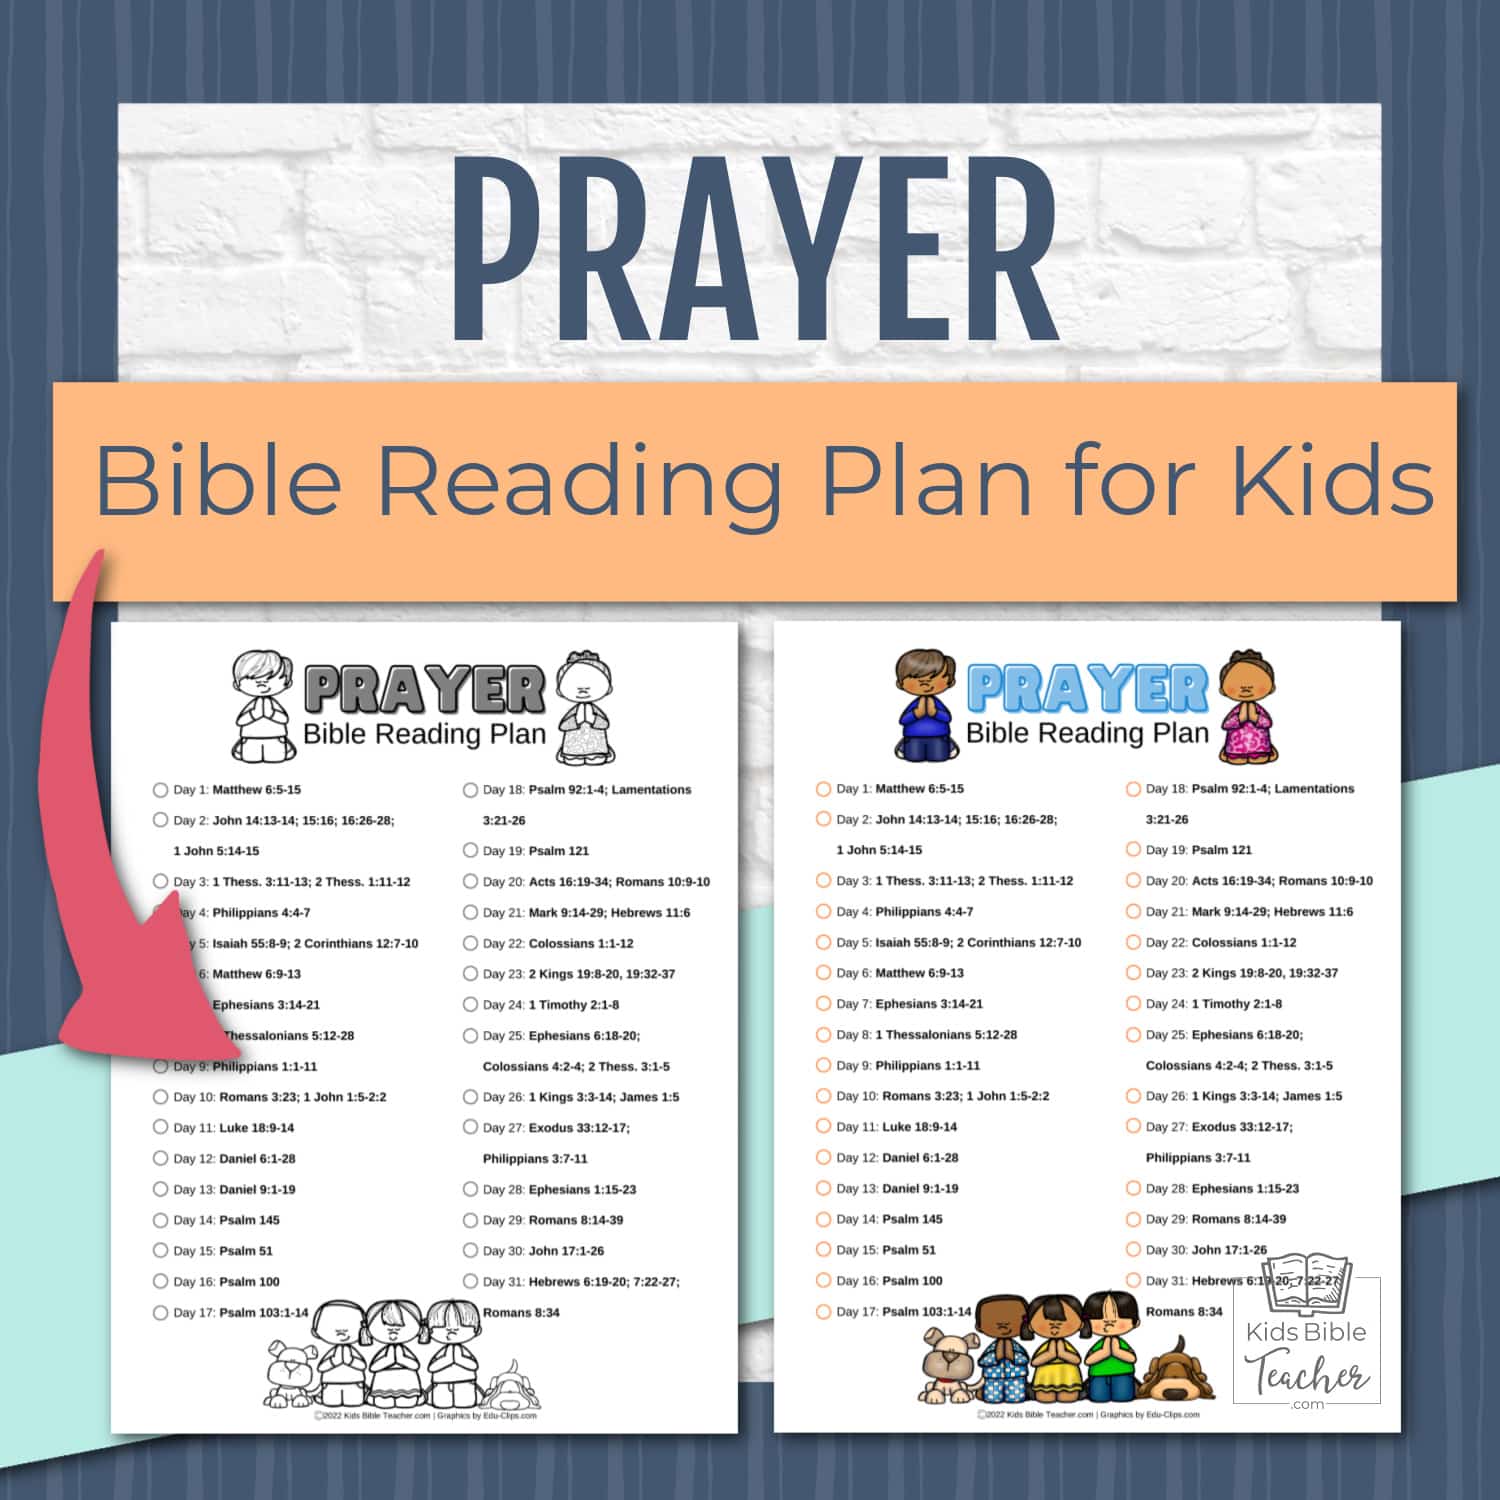 Prayer Bible Reading Plan: Help your kids discover the JOY of PRAYER with this FREE Printable Bible Reading Plan.